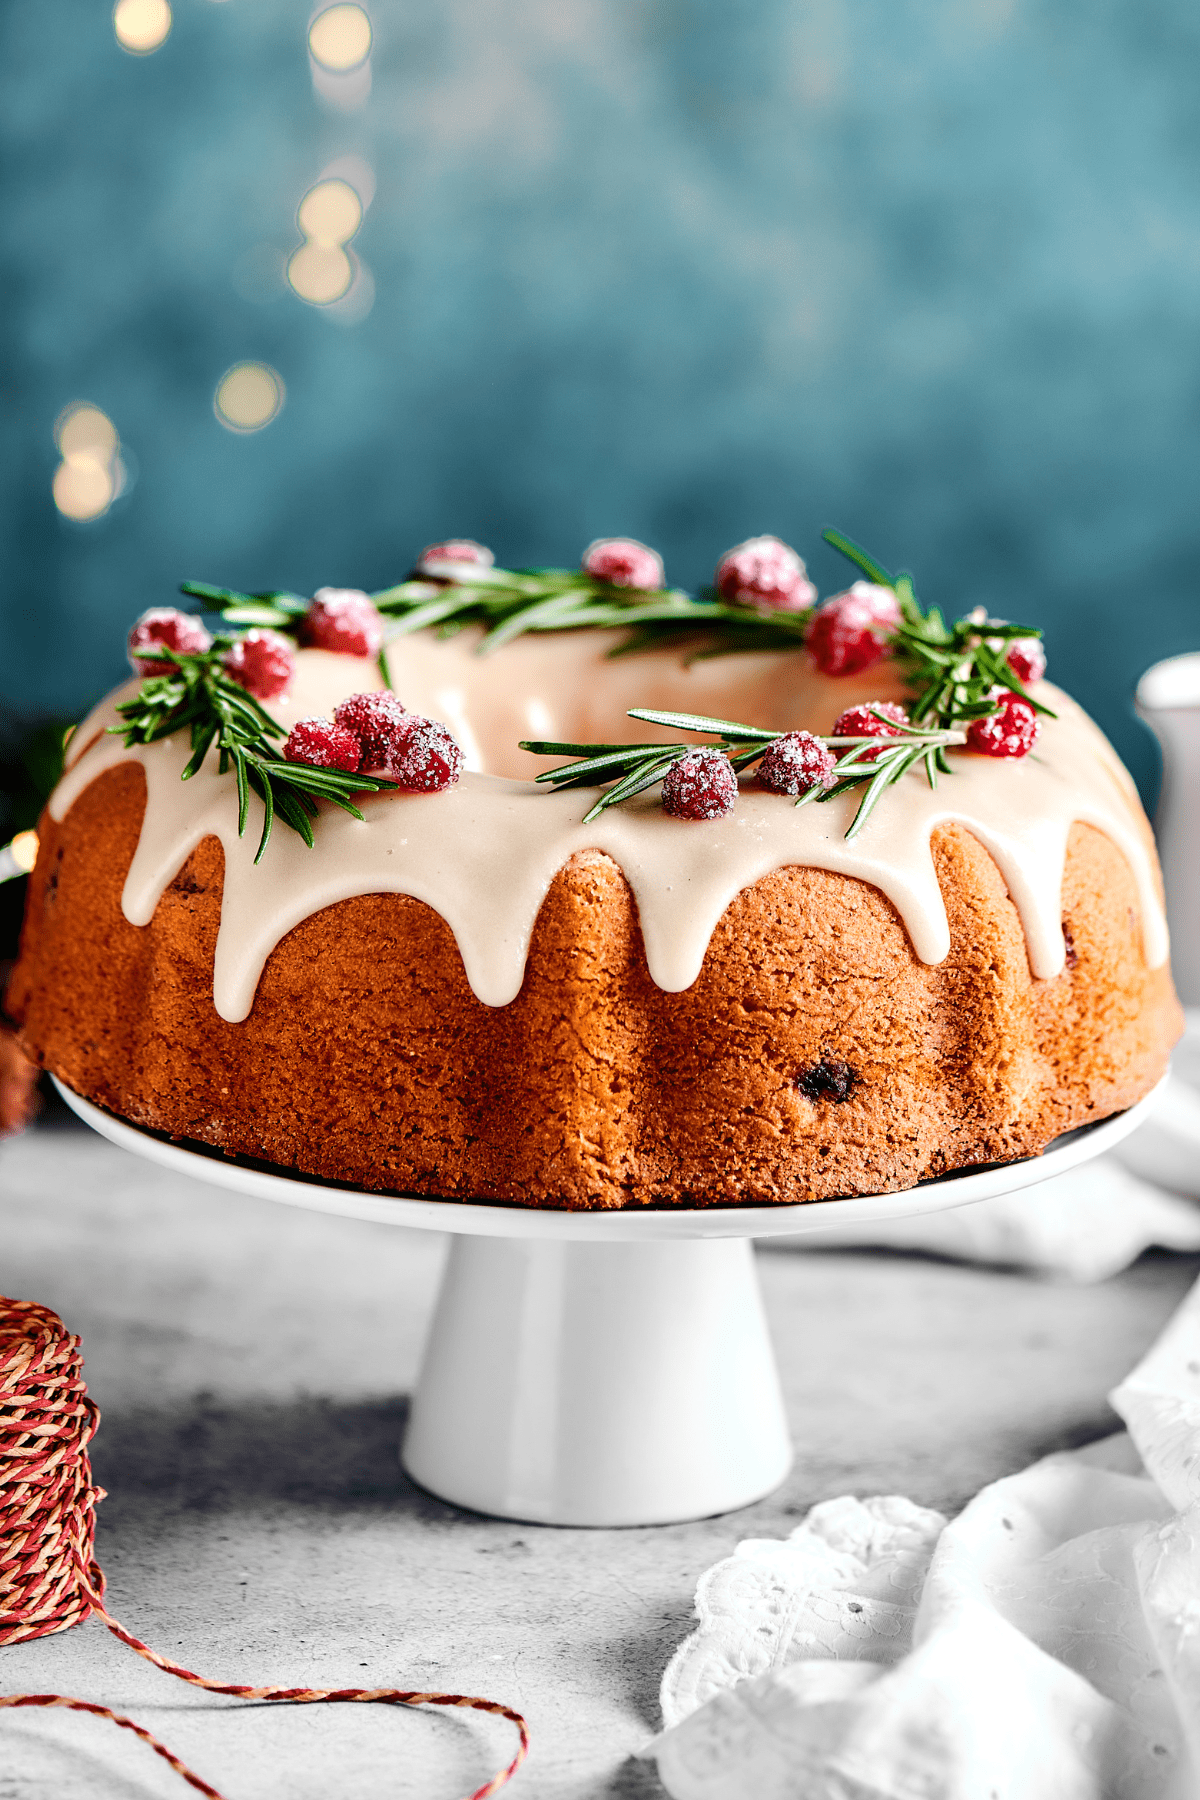 A cranberry pound cake on a white cake stand, with lights in the background of the shot.